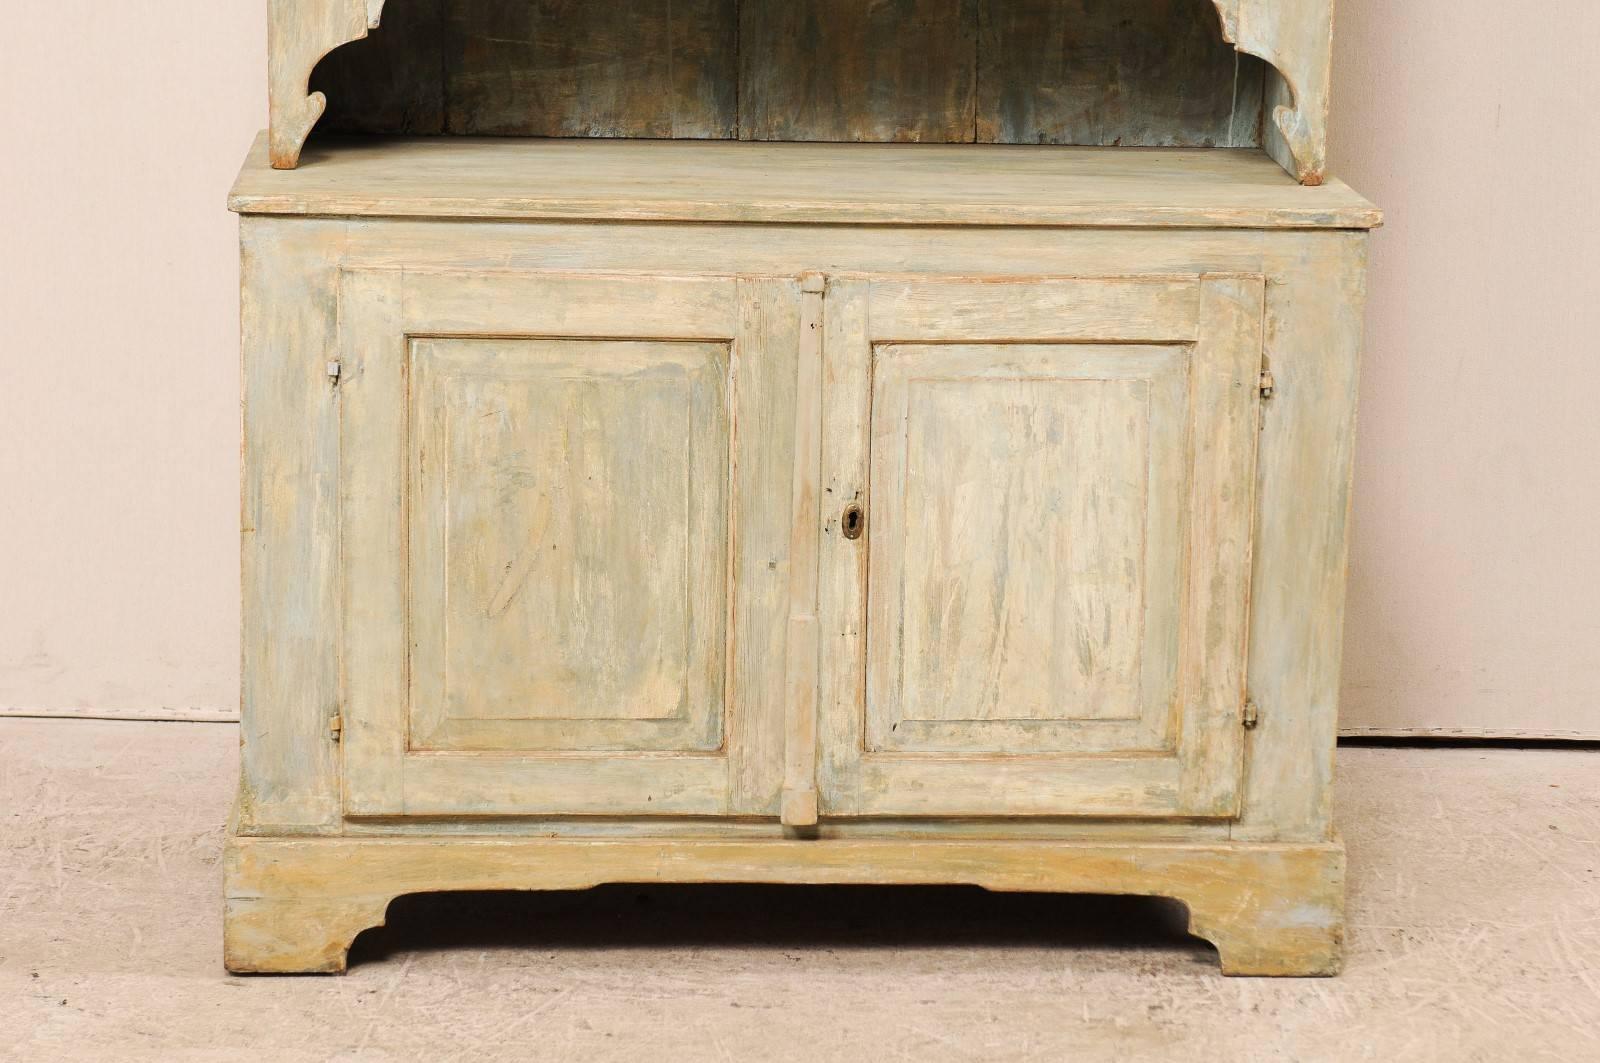 Carved 19th Century Swedish Karl Johan Painted Wood Two-Piece Cabinet with Shelves